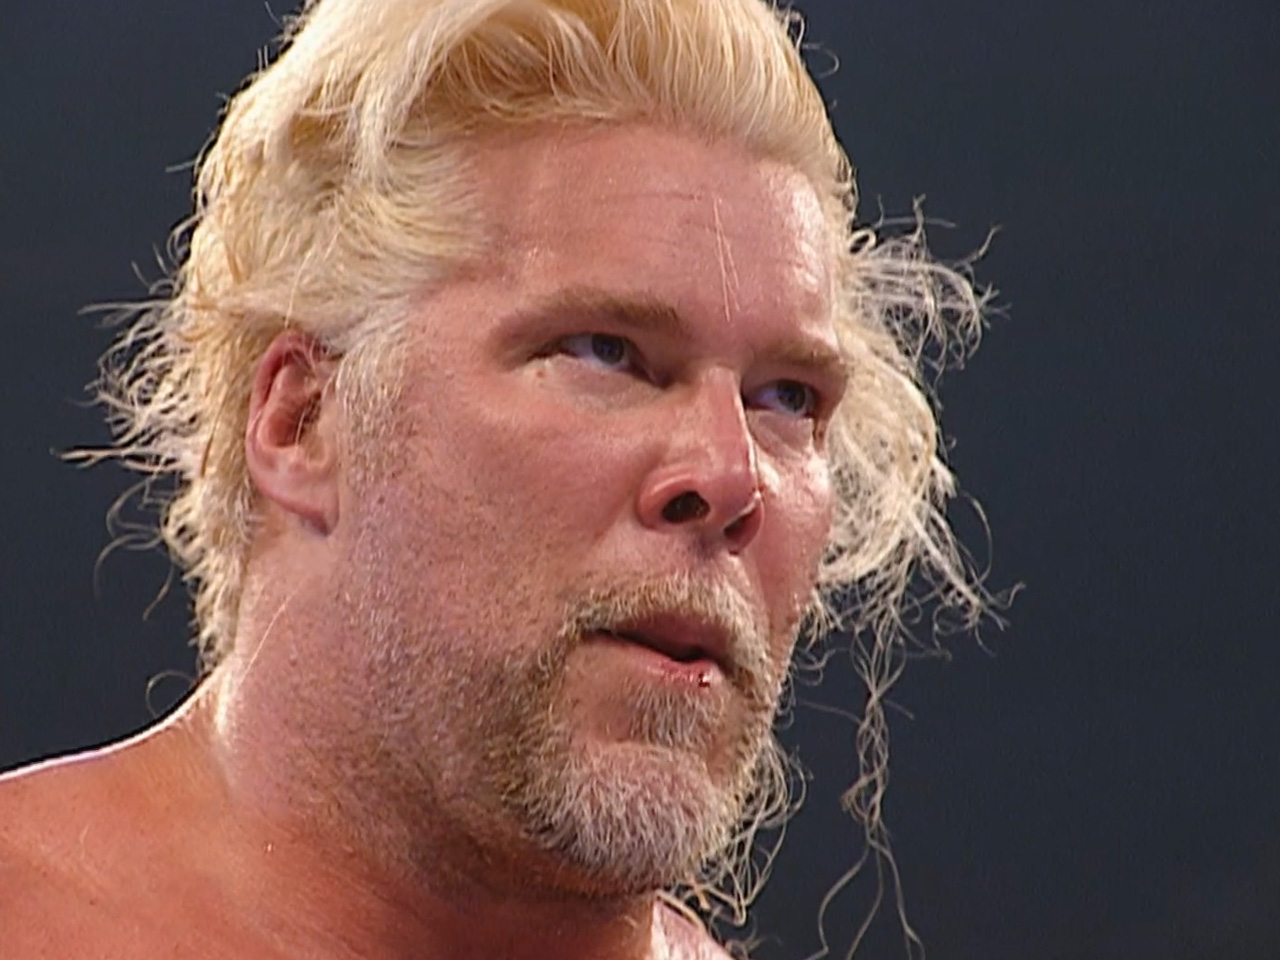 Kevin Nash vs. Chris Jericho Hair Match | The Worst of WWE